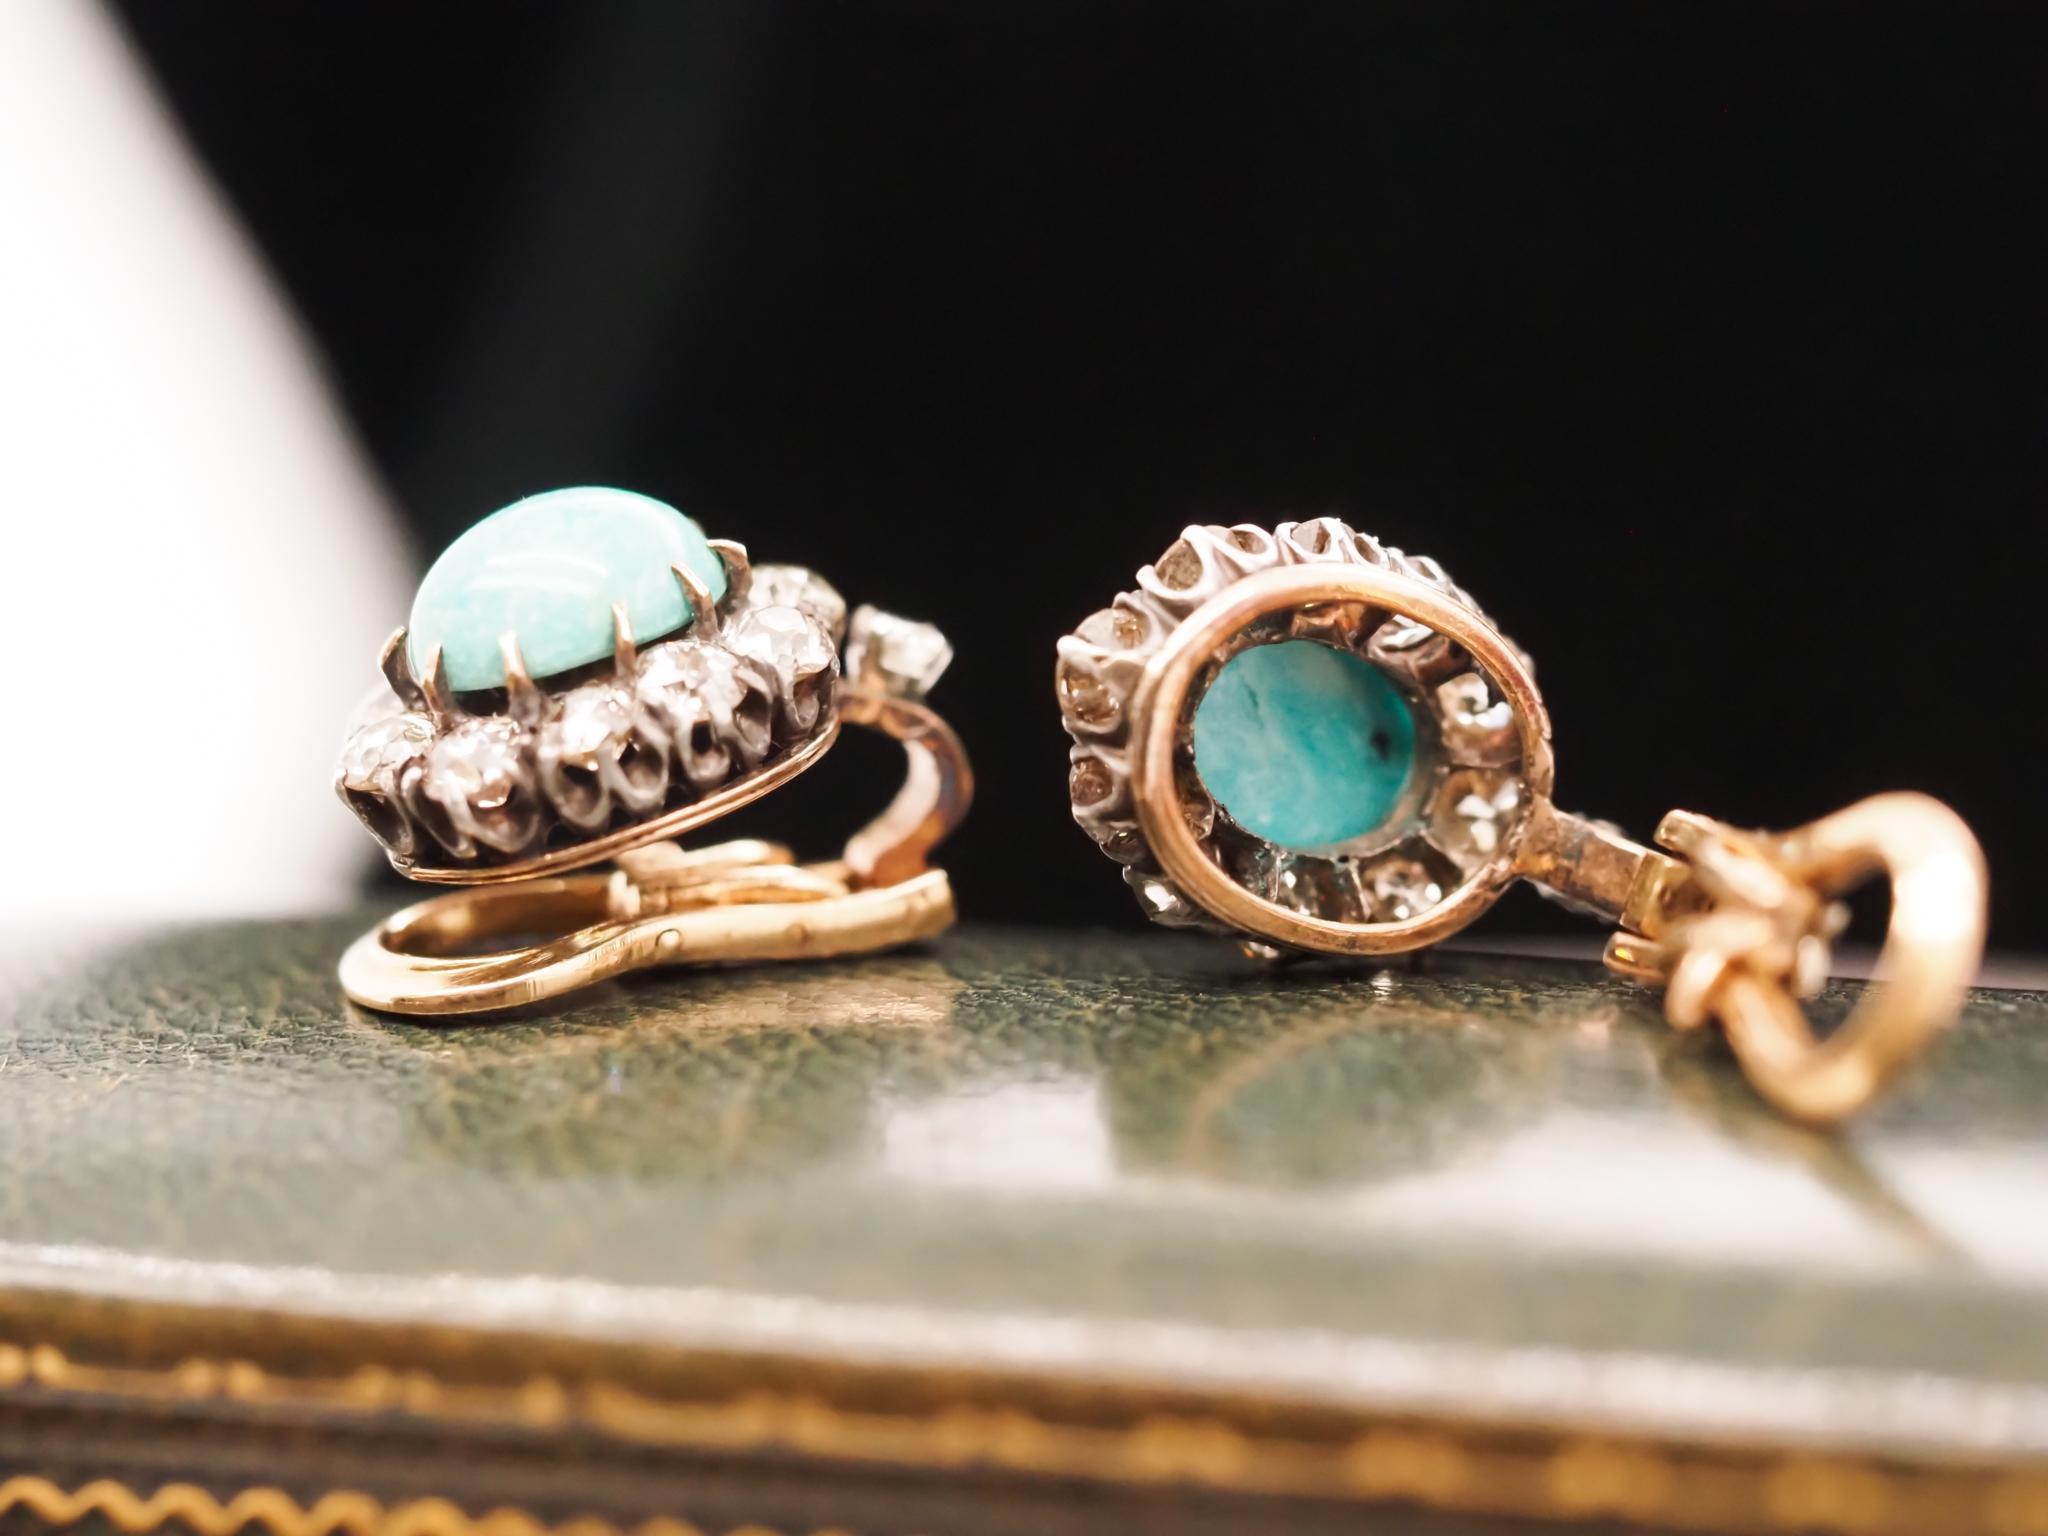 Year: 1890s
Item Details:
Metal Type: 14K Yellow Gold [Hallmarked, and Tested]
Weight: 10.0 grams
Diamond Details:
Weight: 3.25ct, total weight.
Cut: Old Mine brilliant
Color: J-K
Clarity: SI/I
Turquoise Details:
Each turquoise measures 10mm x